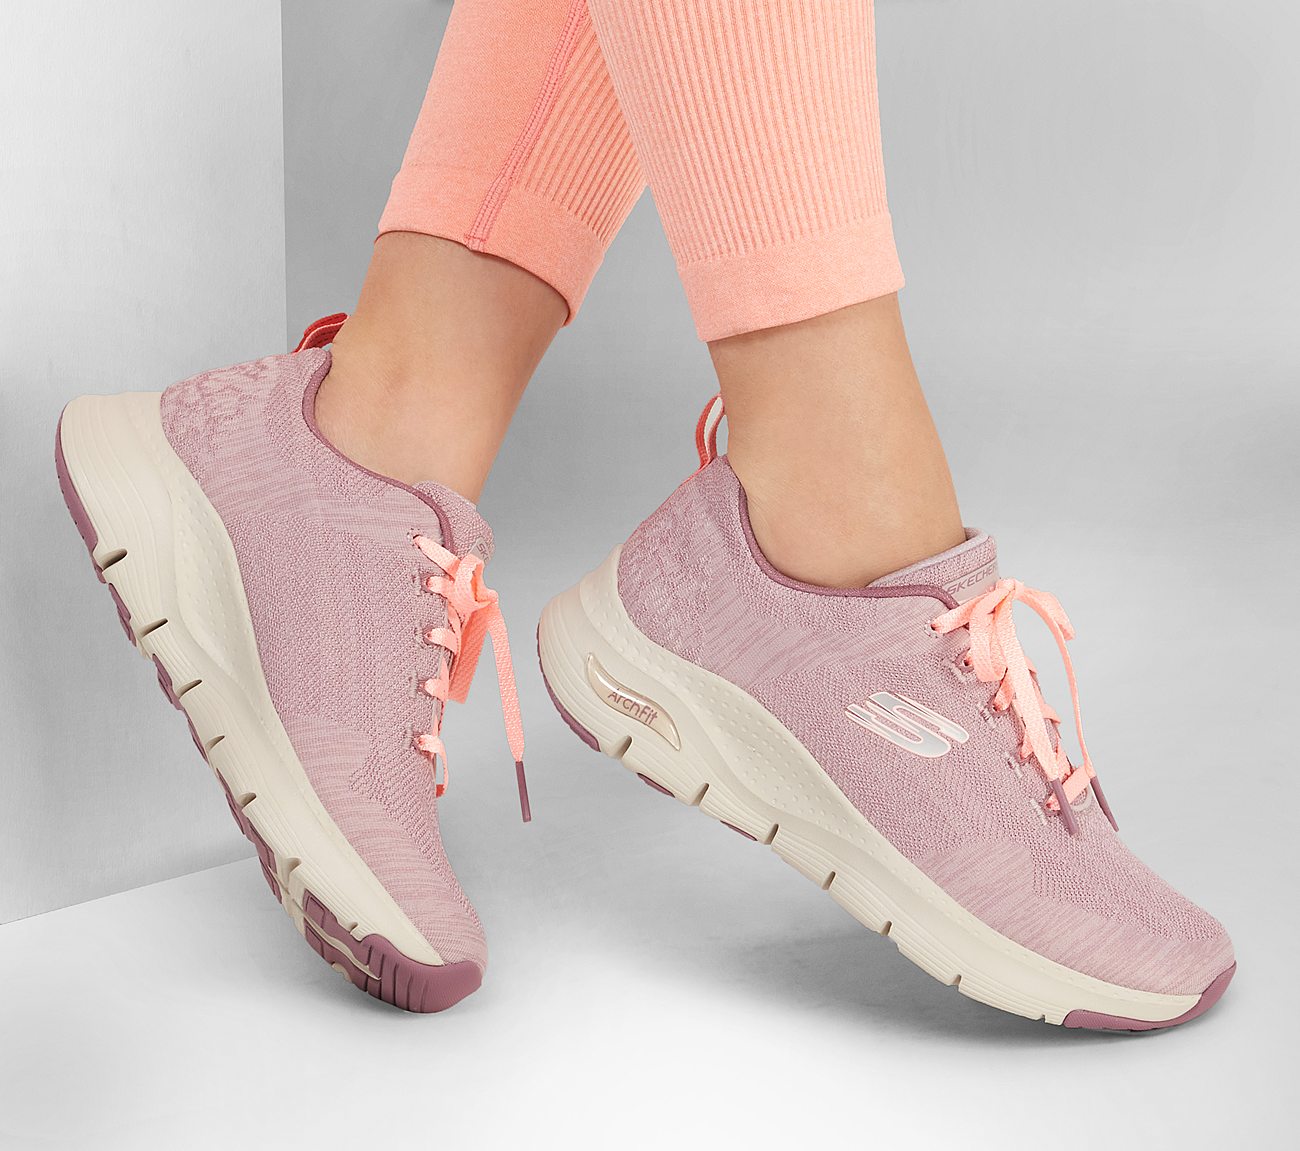 Skechers - Arch Fit Comfy Wave - Pink